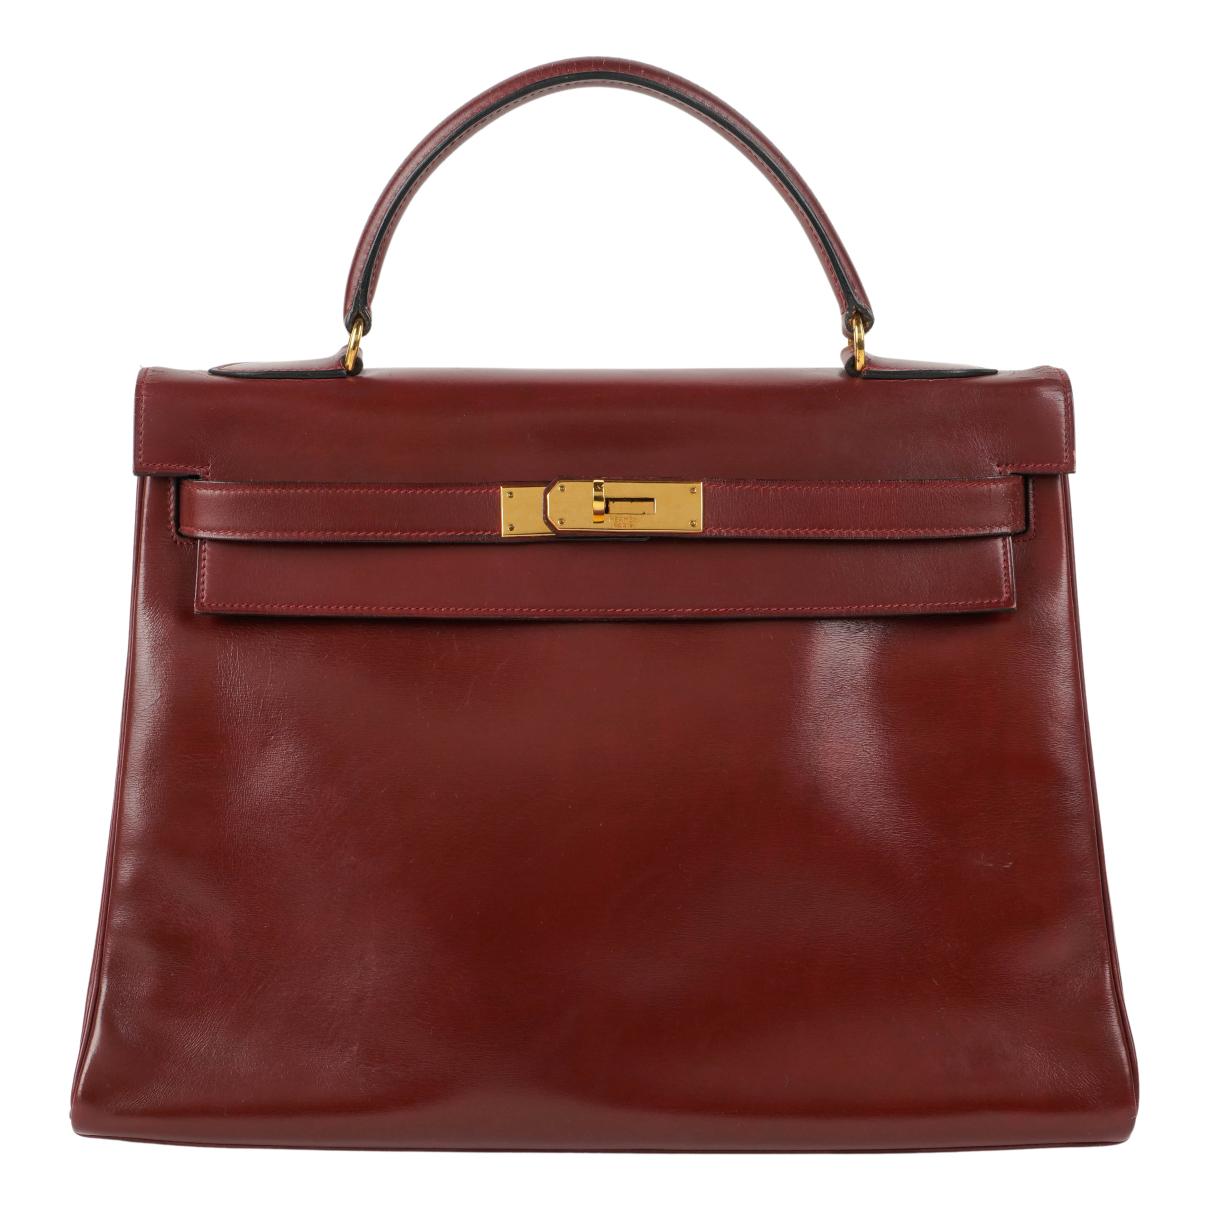 Hermès Kelly 32 Handbag | Buy or Sell a Kelly Bag online - Vestiaire Collective | Vestiaire Collective (Global)